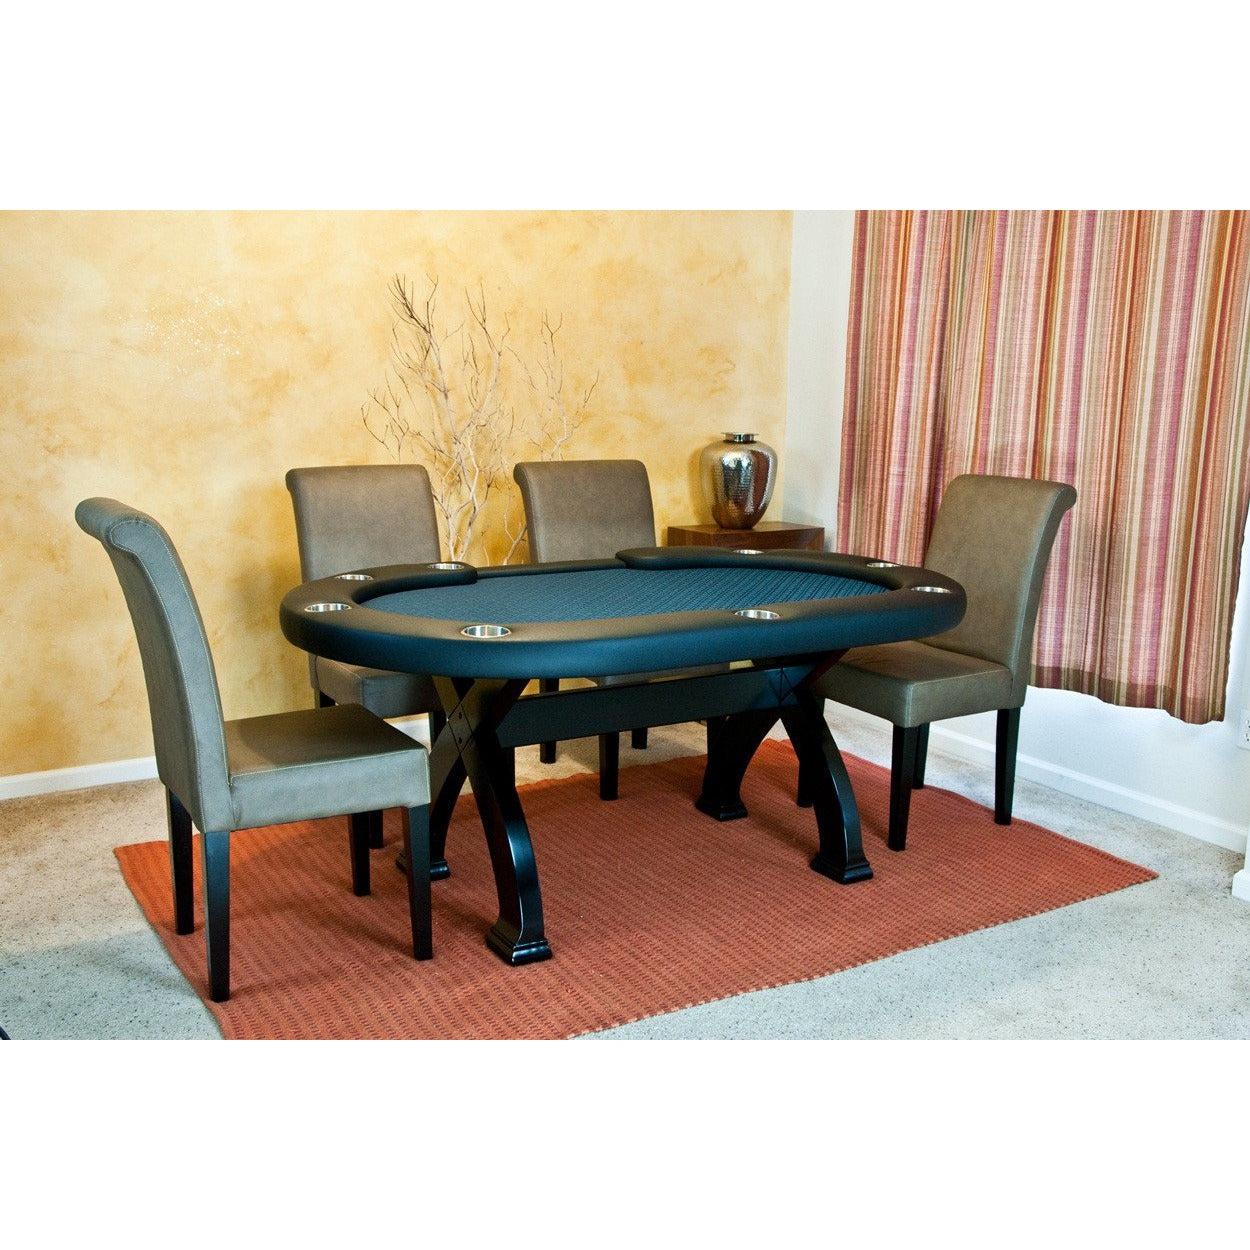 Premium Poker & Lounge Chair Set: 4, 6 or 8 Poker Chairs by BBO-AMERICANA-POKER-TABLES